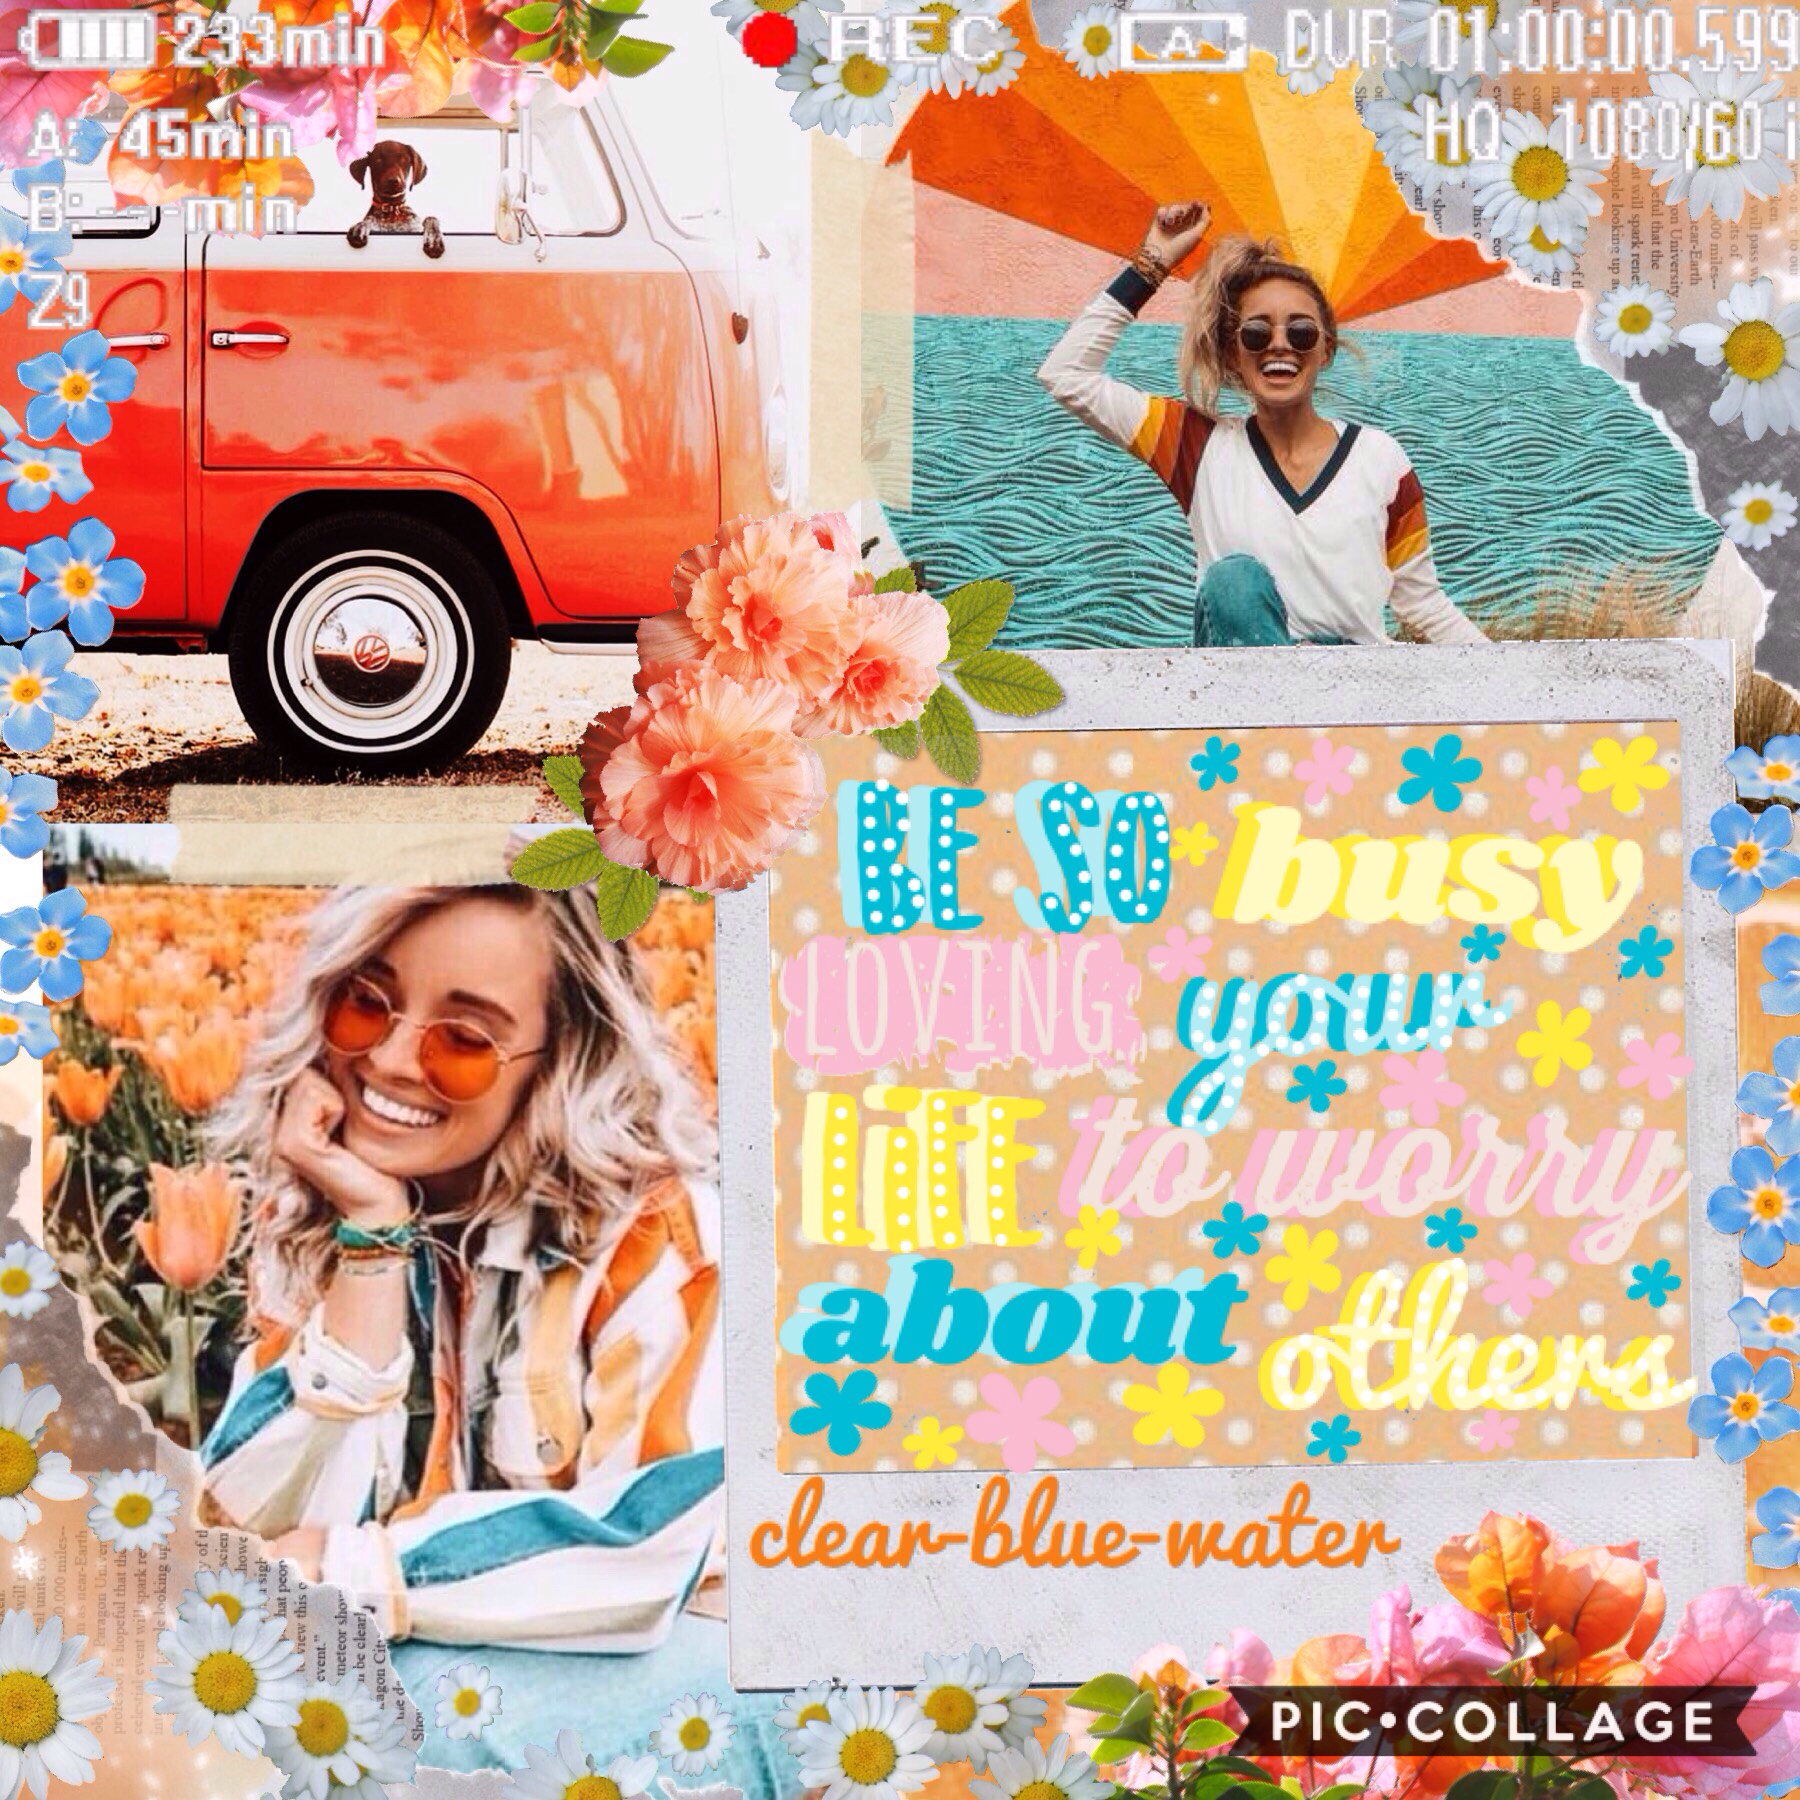 💛T A P💛
Entry to shootingstars- 2K contest which you should definitely enter.
For some reason I had a dream about this collage and then I tried to recreate what I saw in my dream but I couldn't find any backgrounds exactly like what I dreamed.
QOTD: Do yo